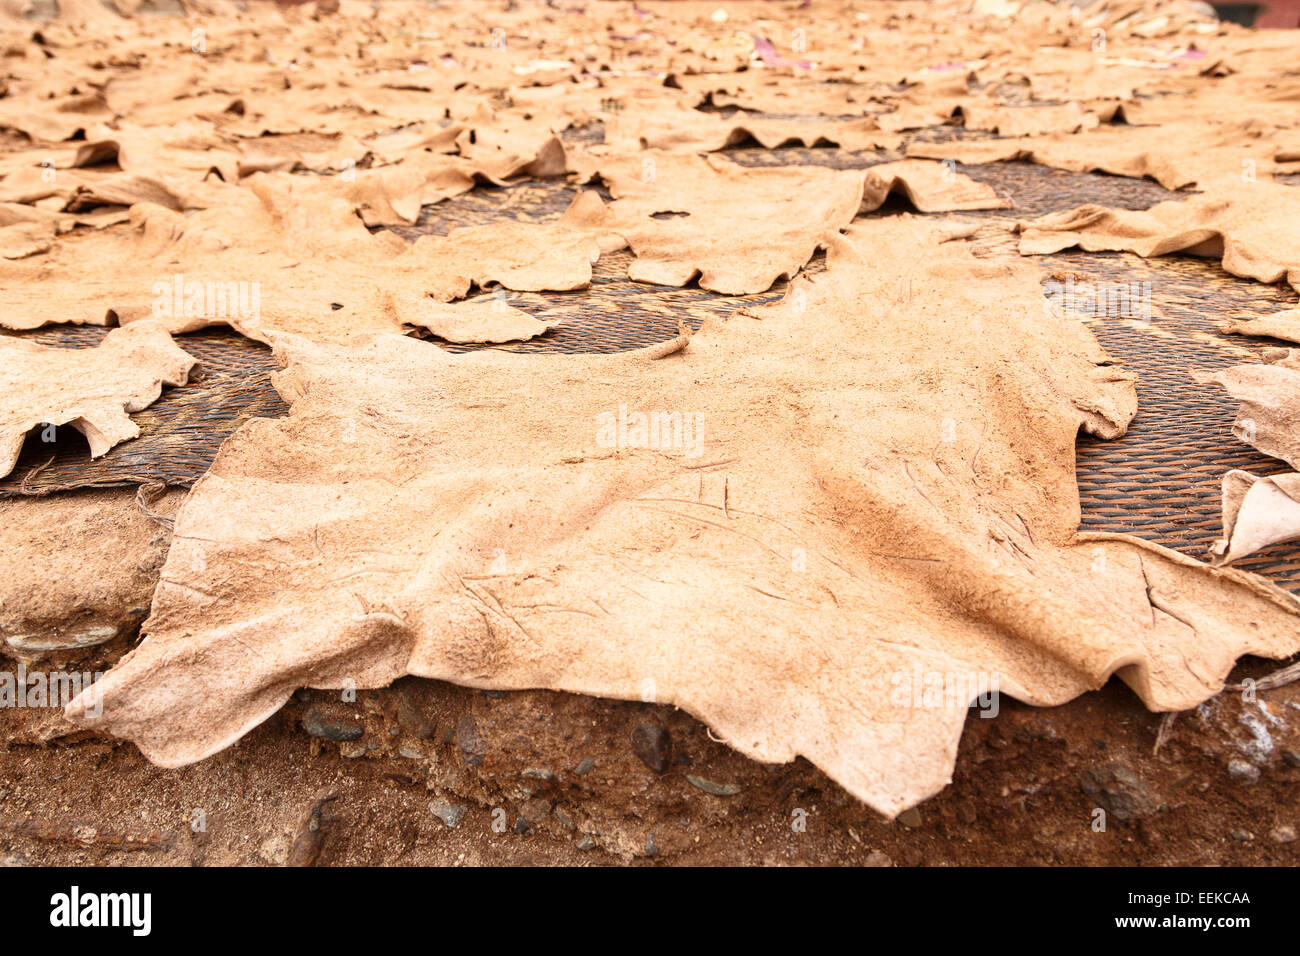 Tanneries. Marrakech. Morocco. North Africa. Africa Stock Photo